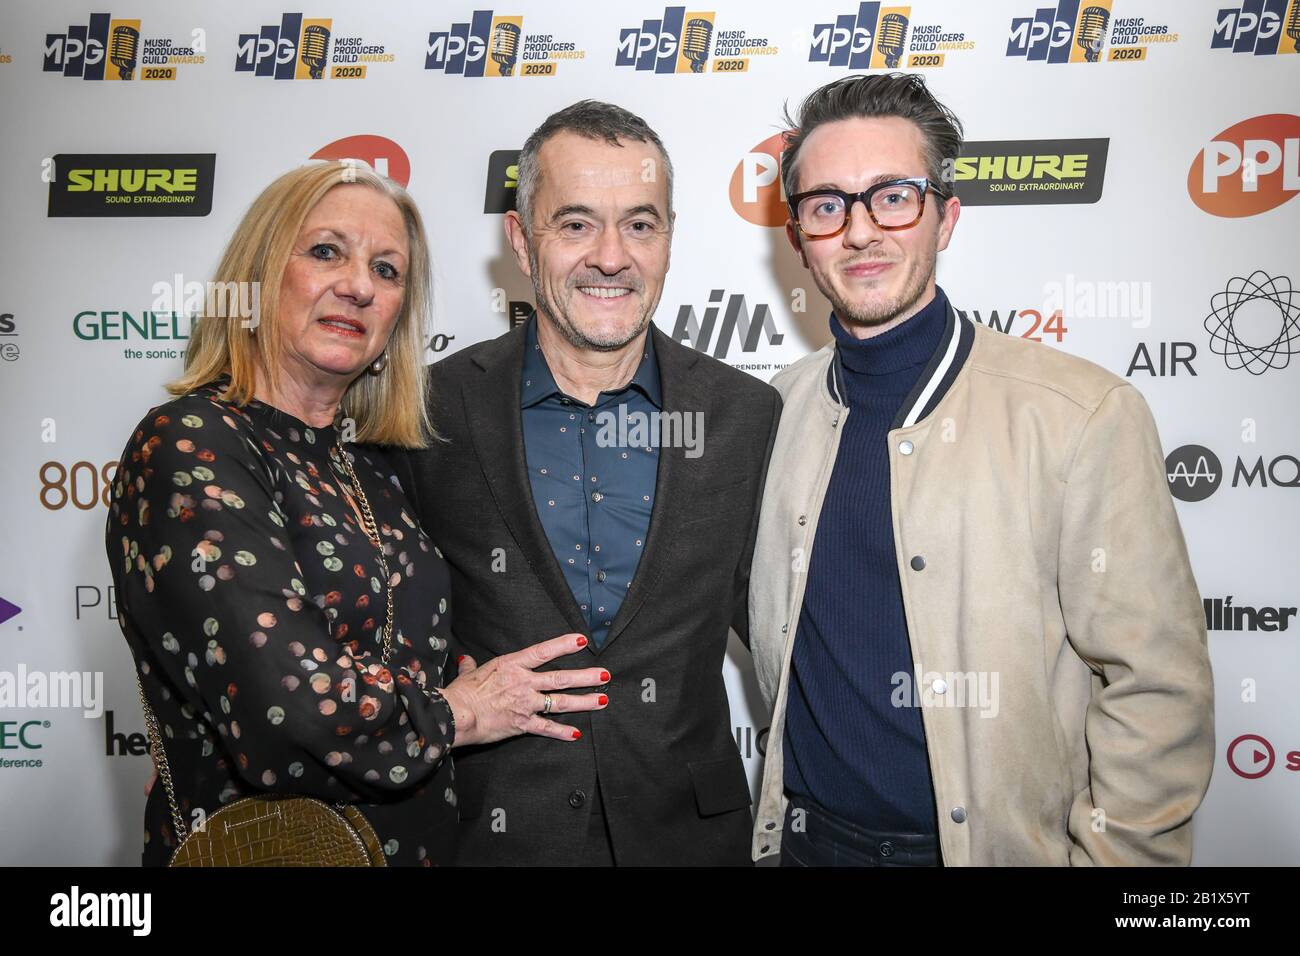 London, UK. 27th Feb 2020. Stephen Street, wife and son attend The Music Producers Guild Awards at Grosvenor House, Park Lane, on 27th February 2020, London, UK. Credit: Picture Capital/Alamy Live News Stock Photo